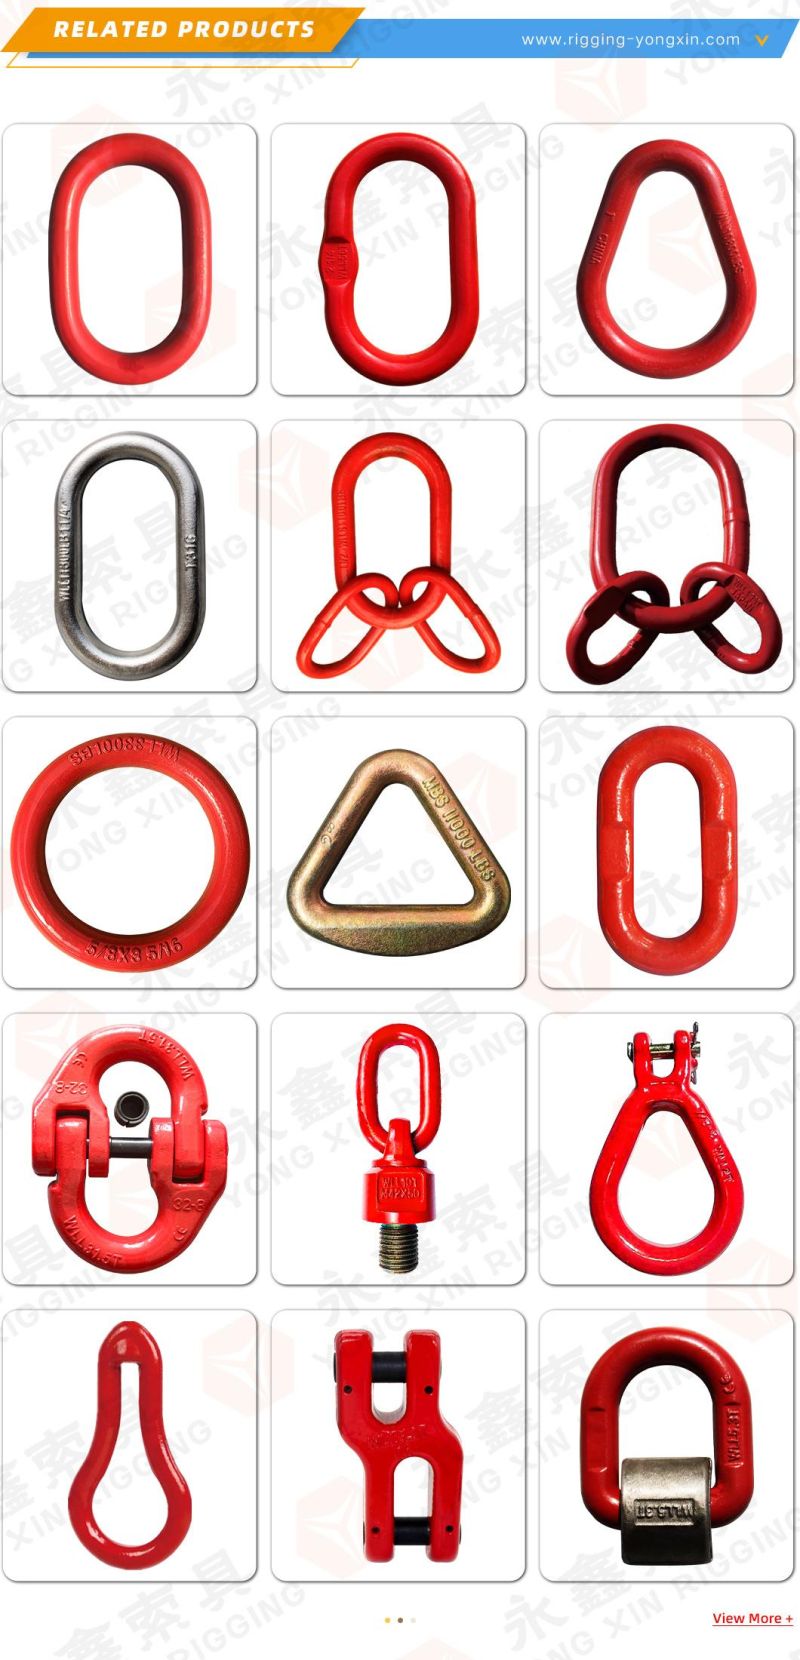 Yongxin Rigging High Quality G80 Forged Master Link for Chain Sling Assembly